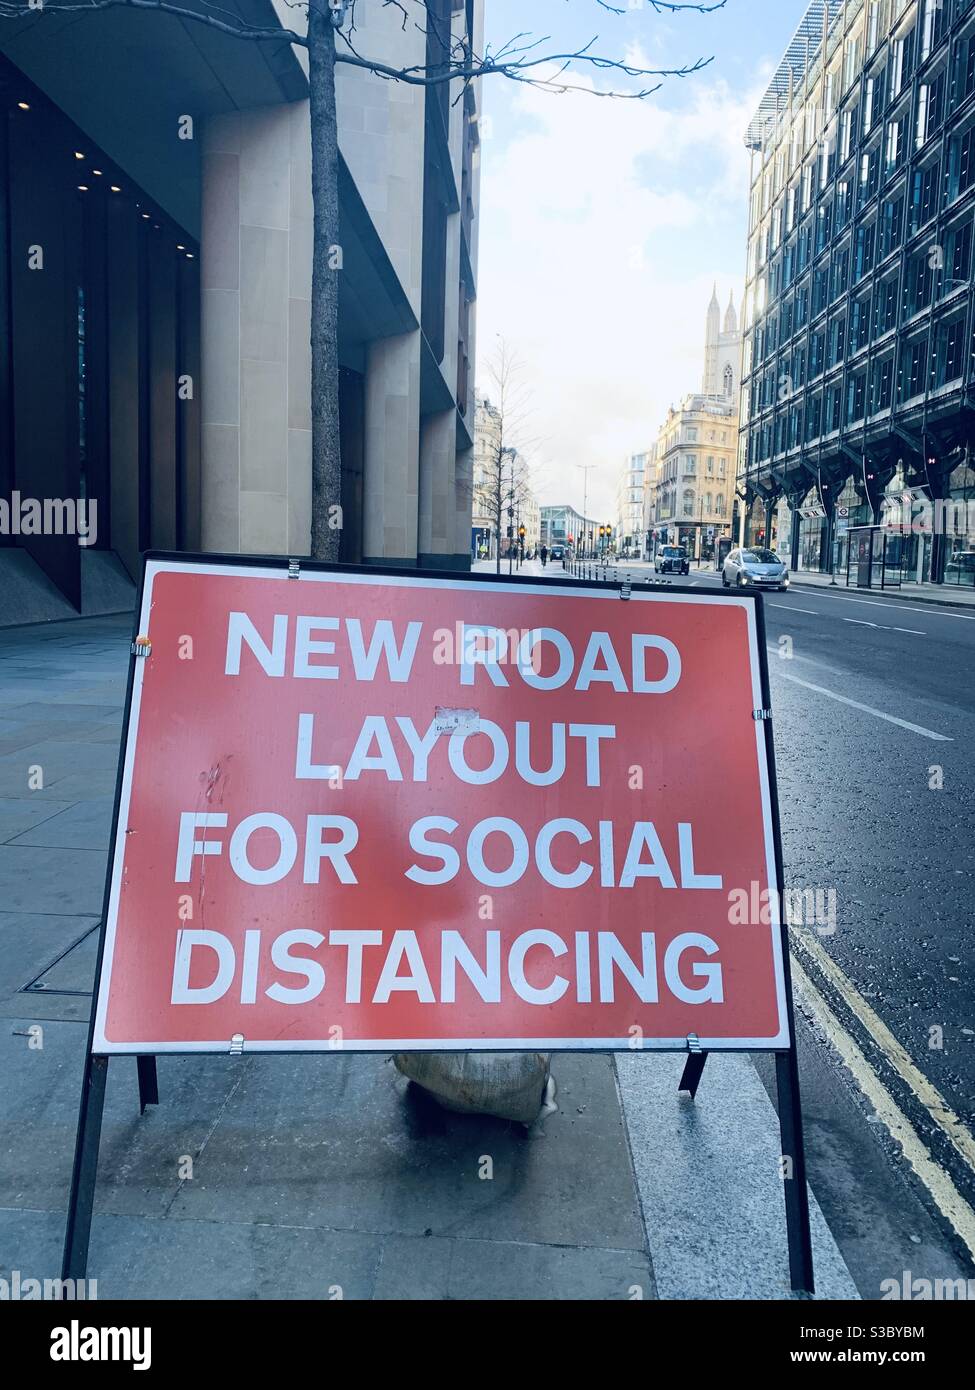 Red square sign new Covid road layout for social distancing Stock Photo